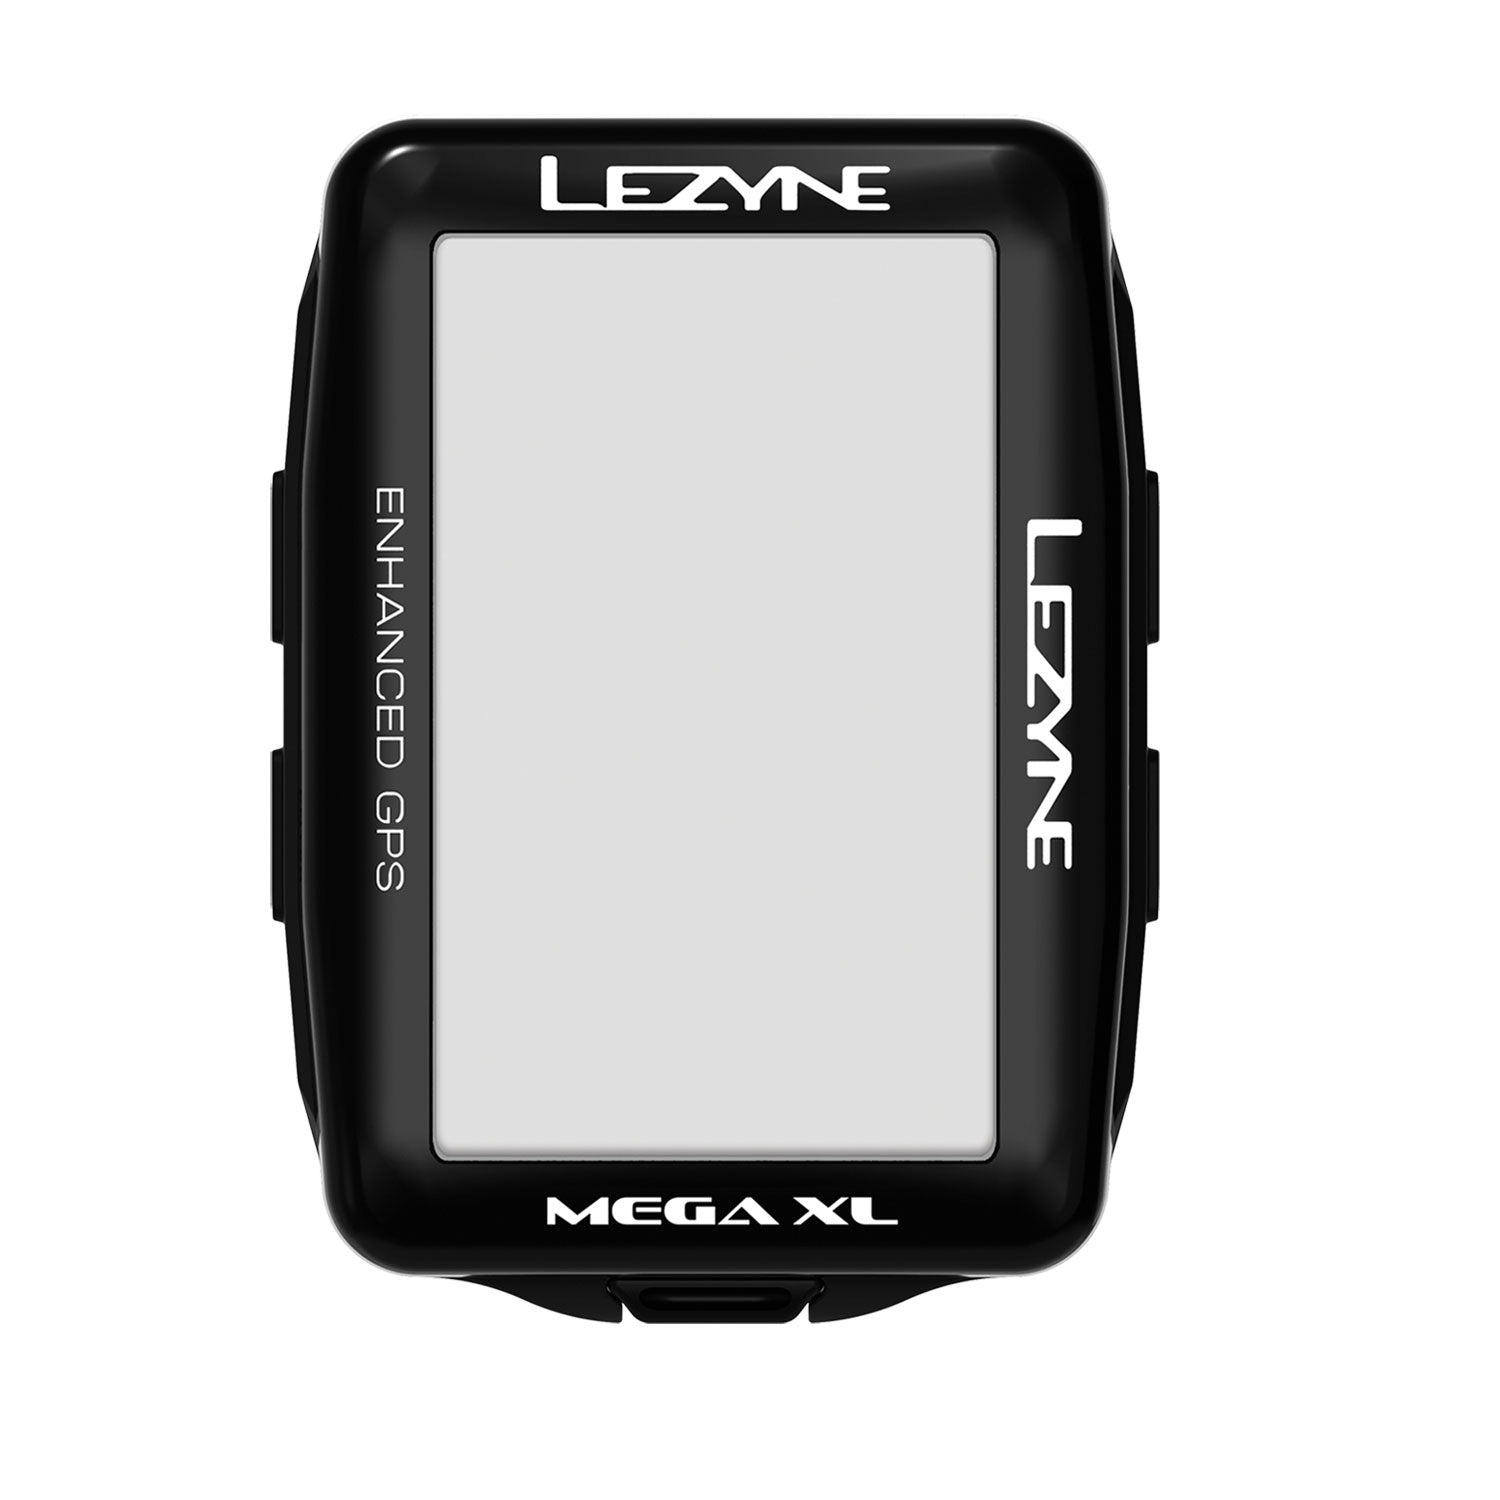 The Mega XL GPS: Here For The Long Haul